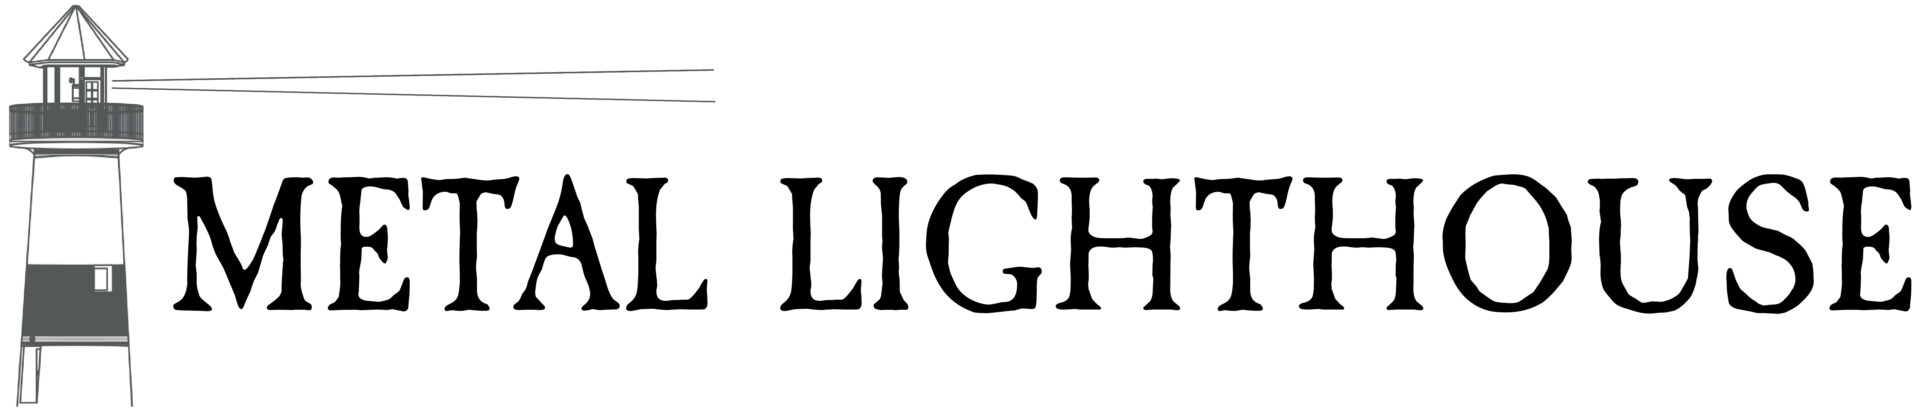 Metal Lighthouse Logo - One Line Text